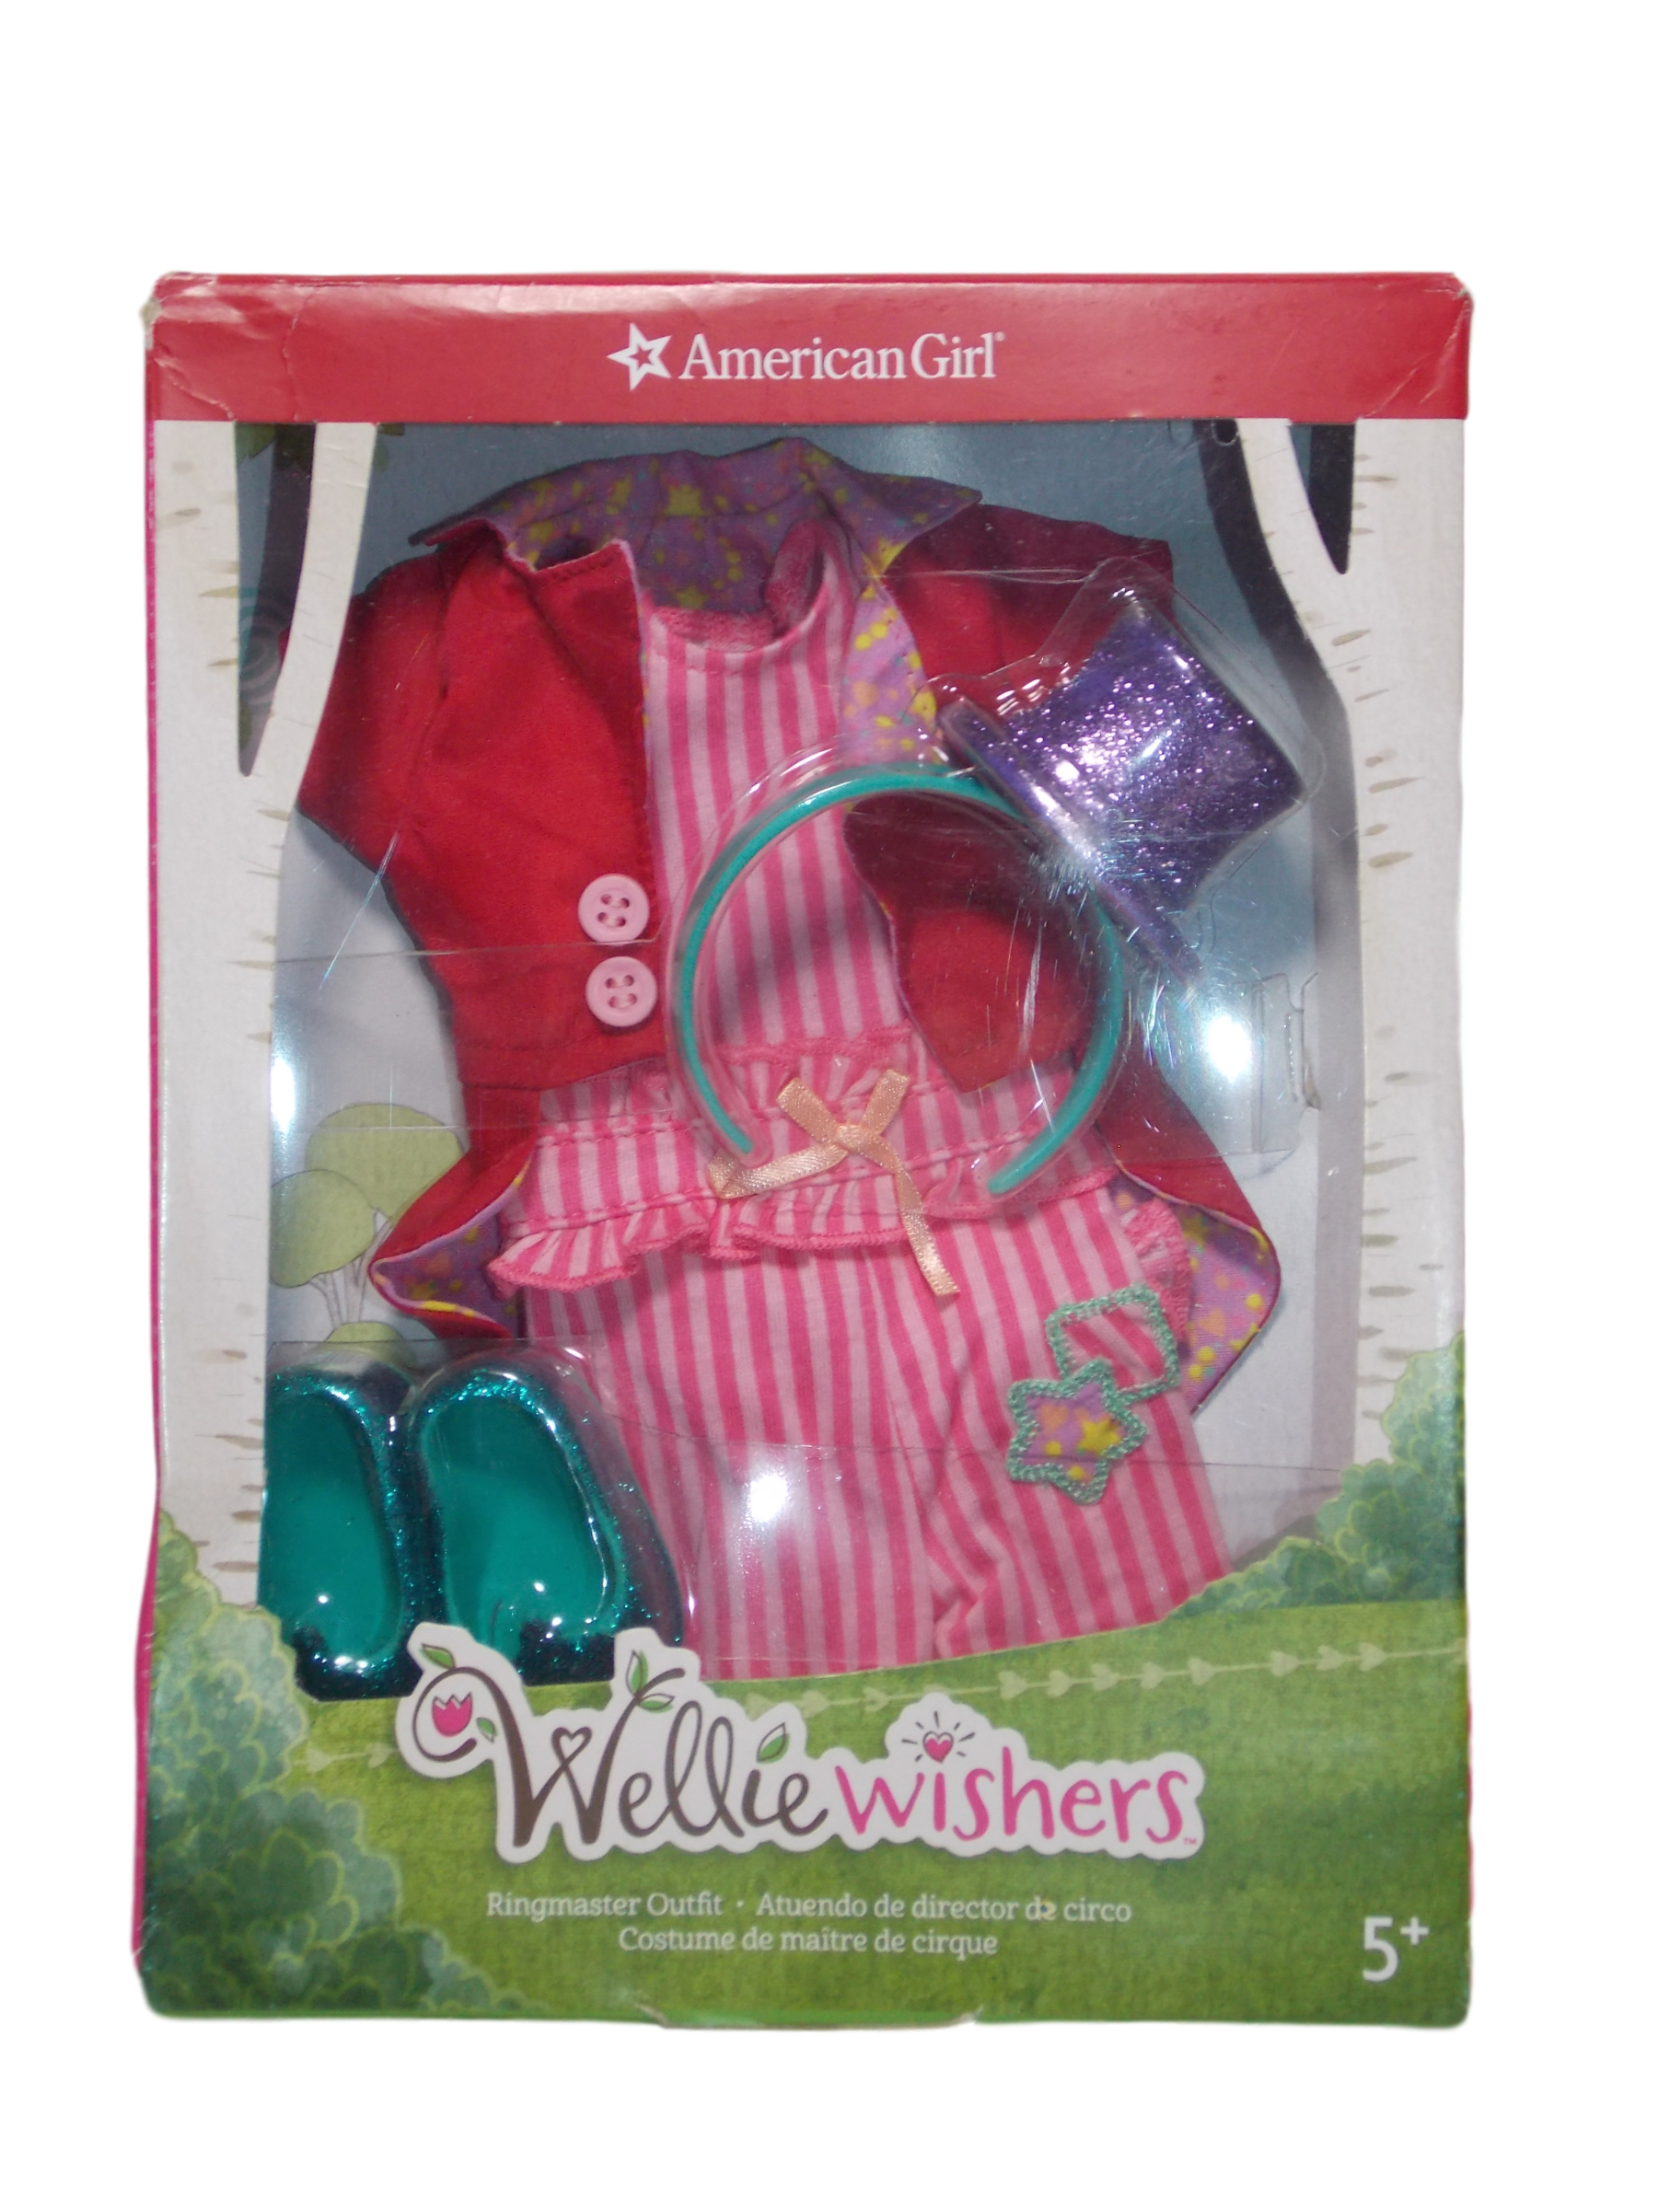 American Girl Wellie Wishers Ringmaster Outfit New doll clothes New in Box 